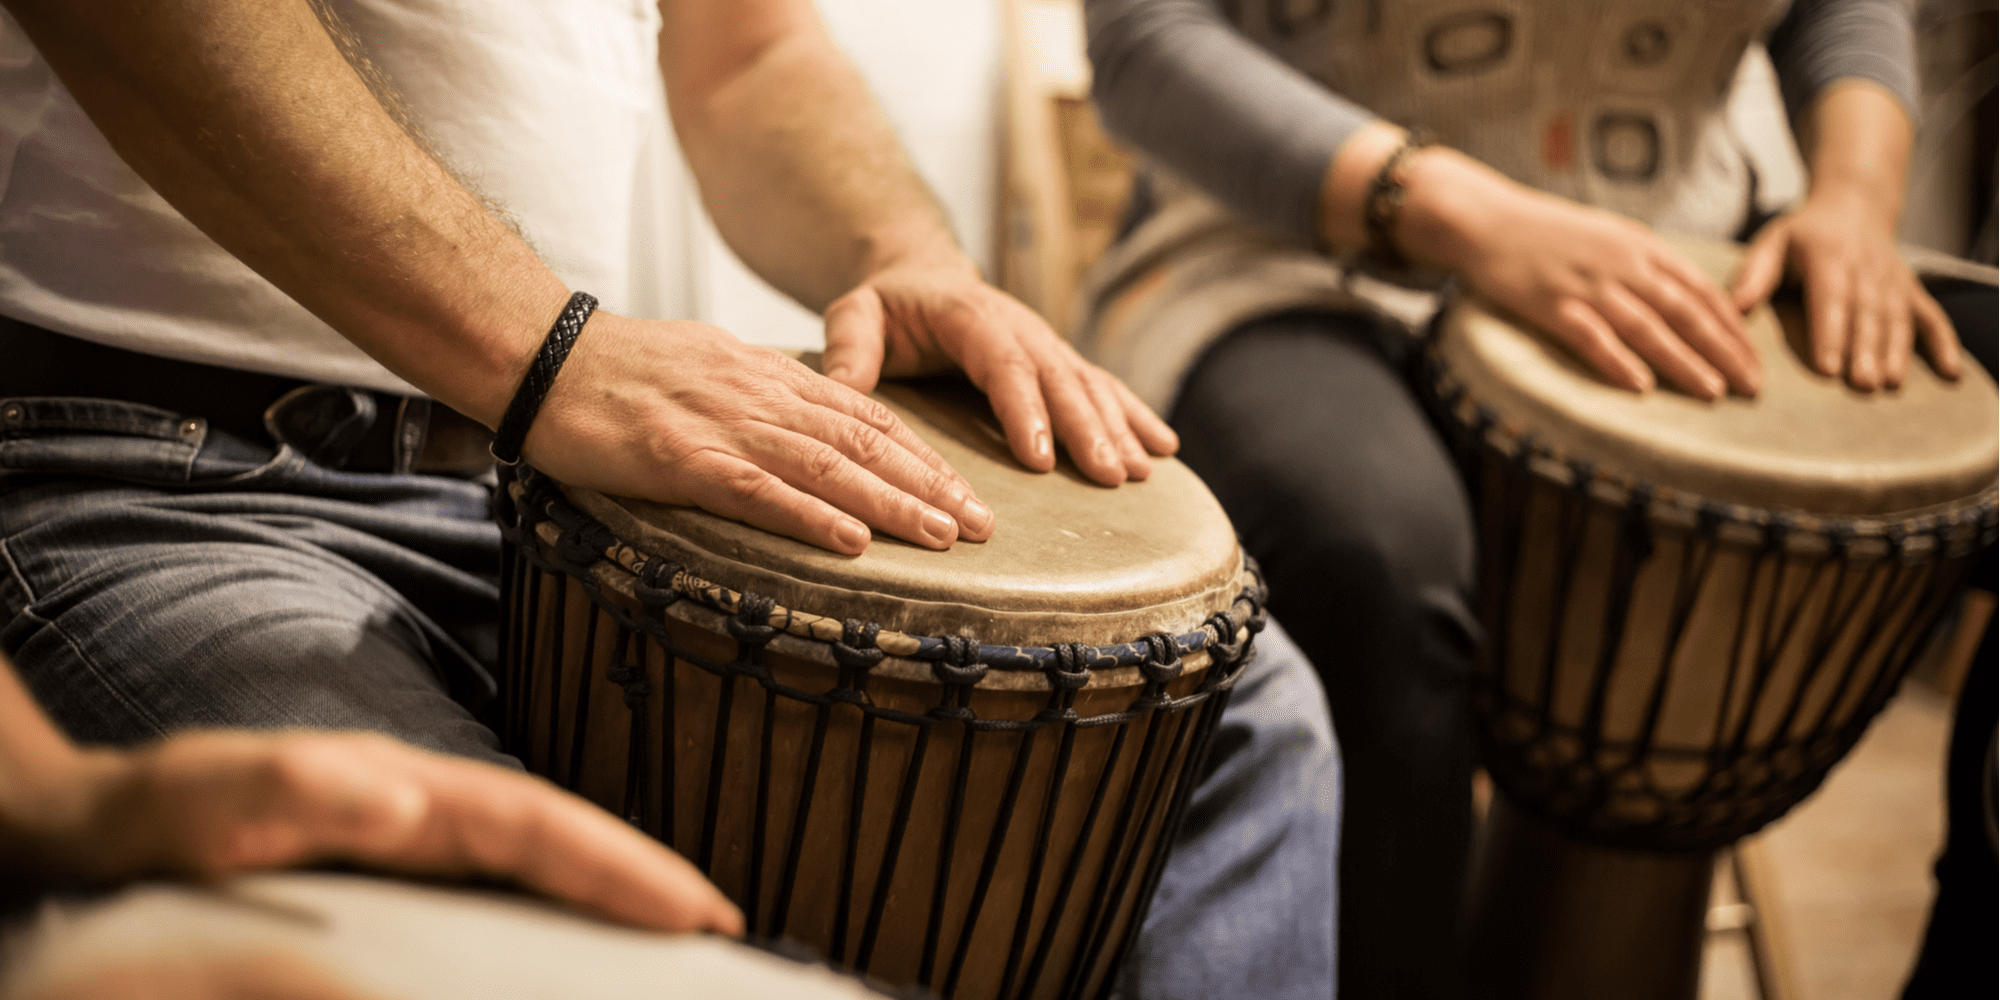 5 Surprising Benefits of Music Therapy for Addiction Recovery